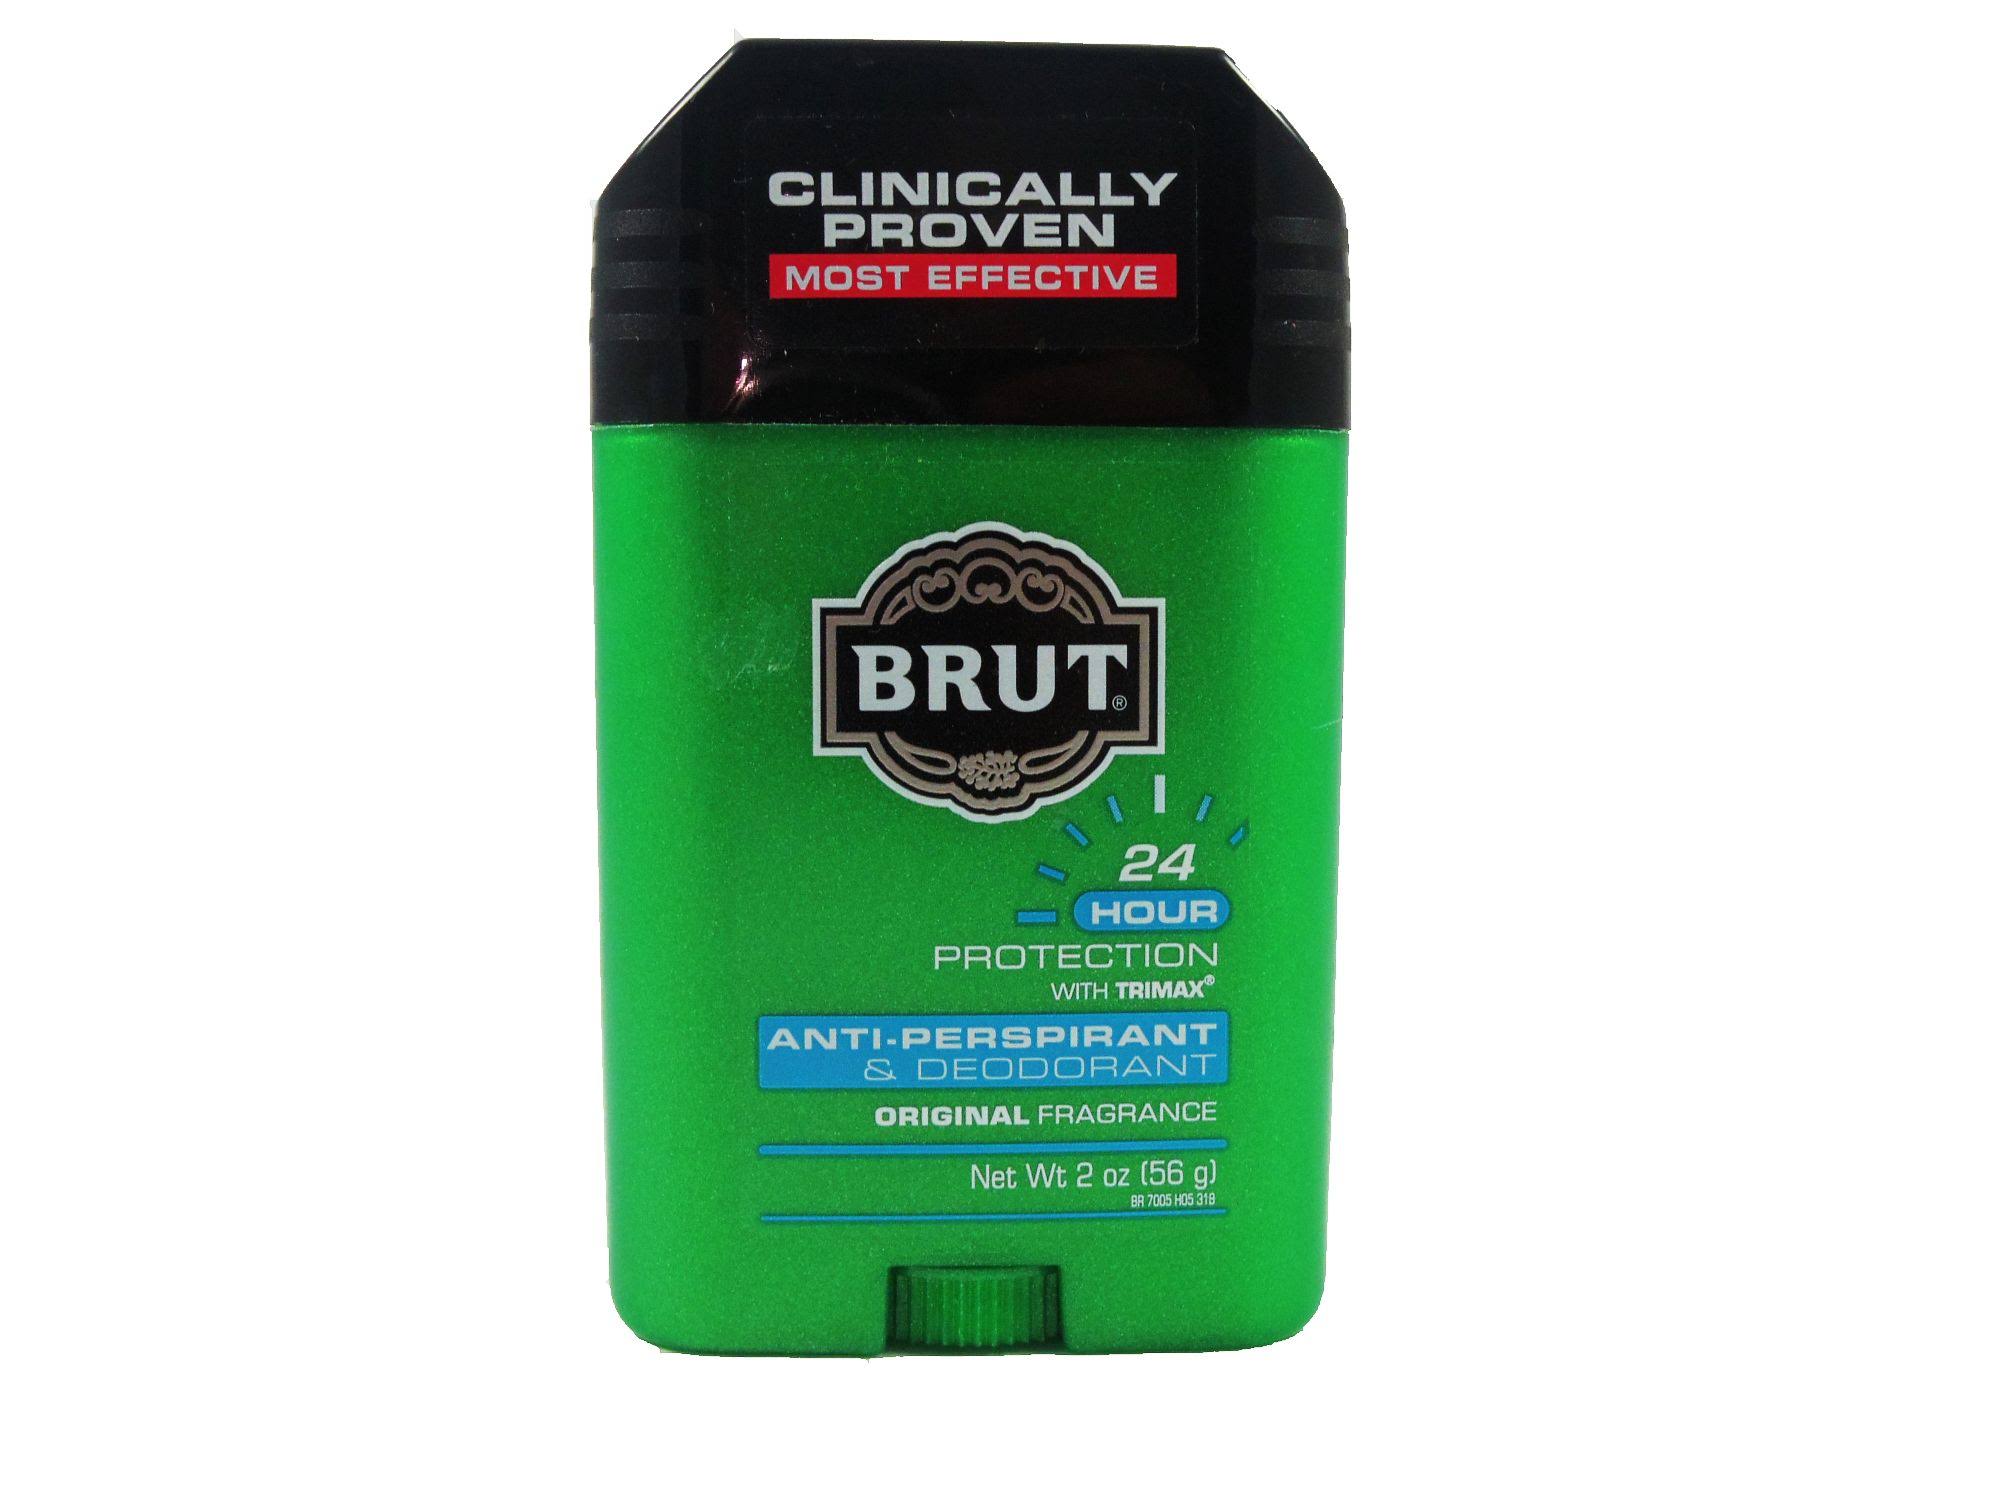 Brut Oval Solid Anti Perspirant and Deodorant - Classic Scent, 2oz